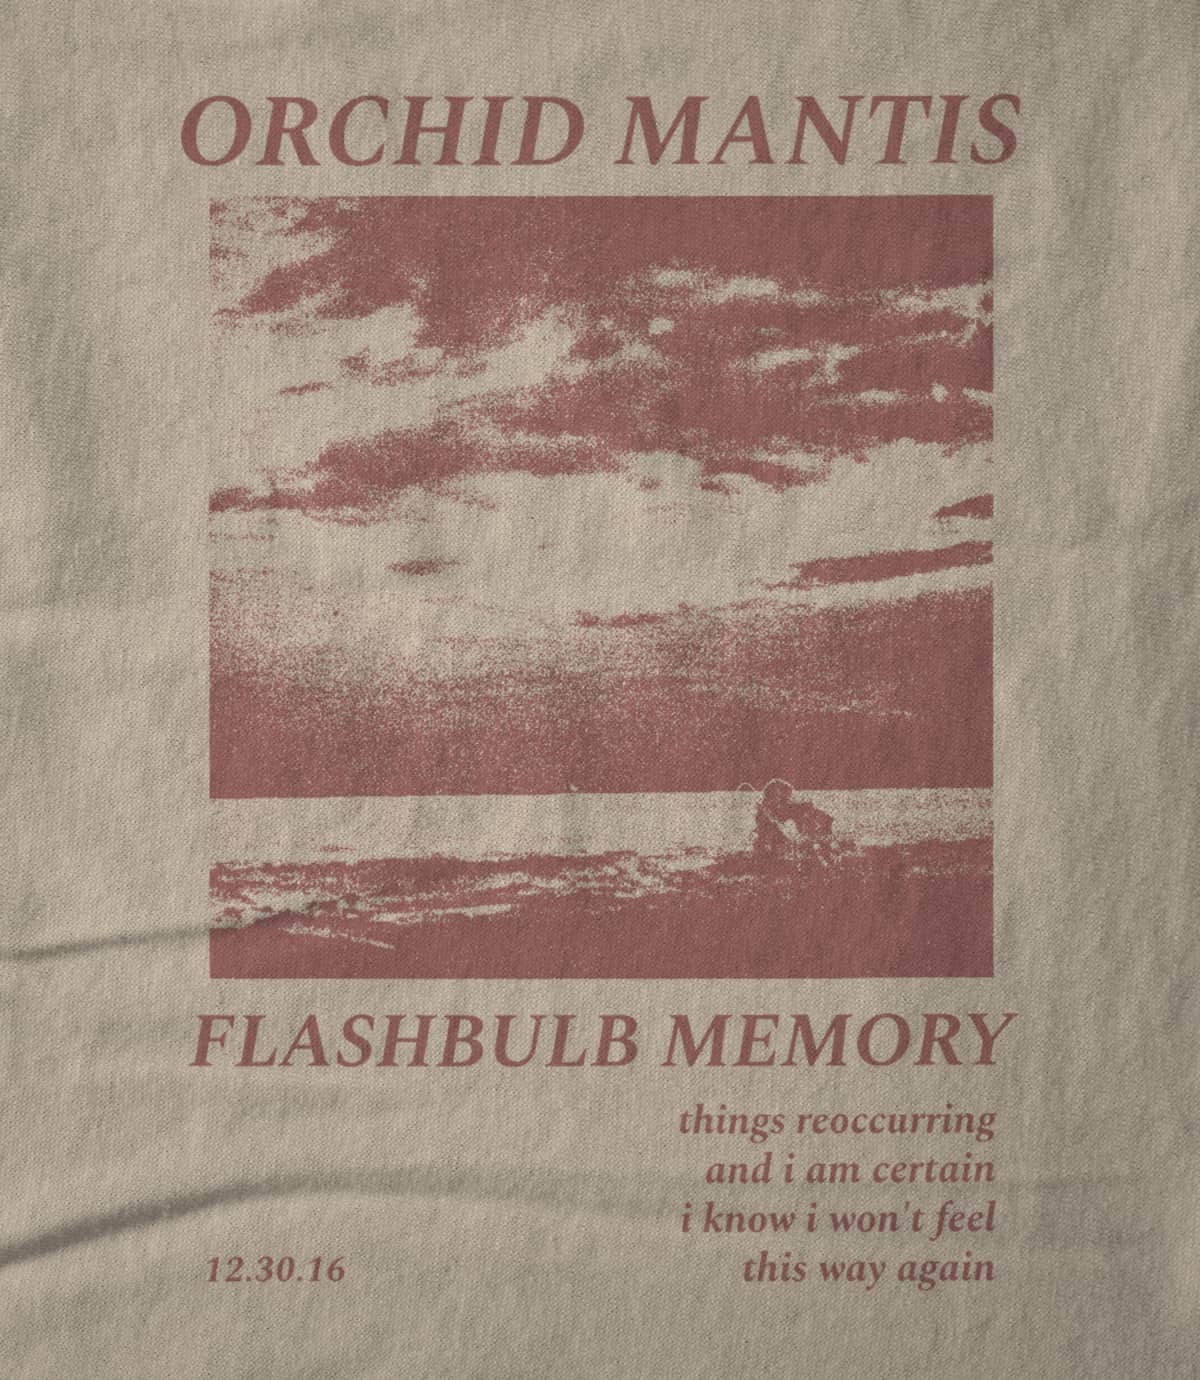 Orchid mantis flashbulb shirt   creme red 1644434790